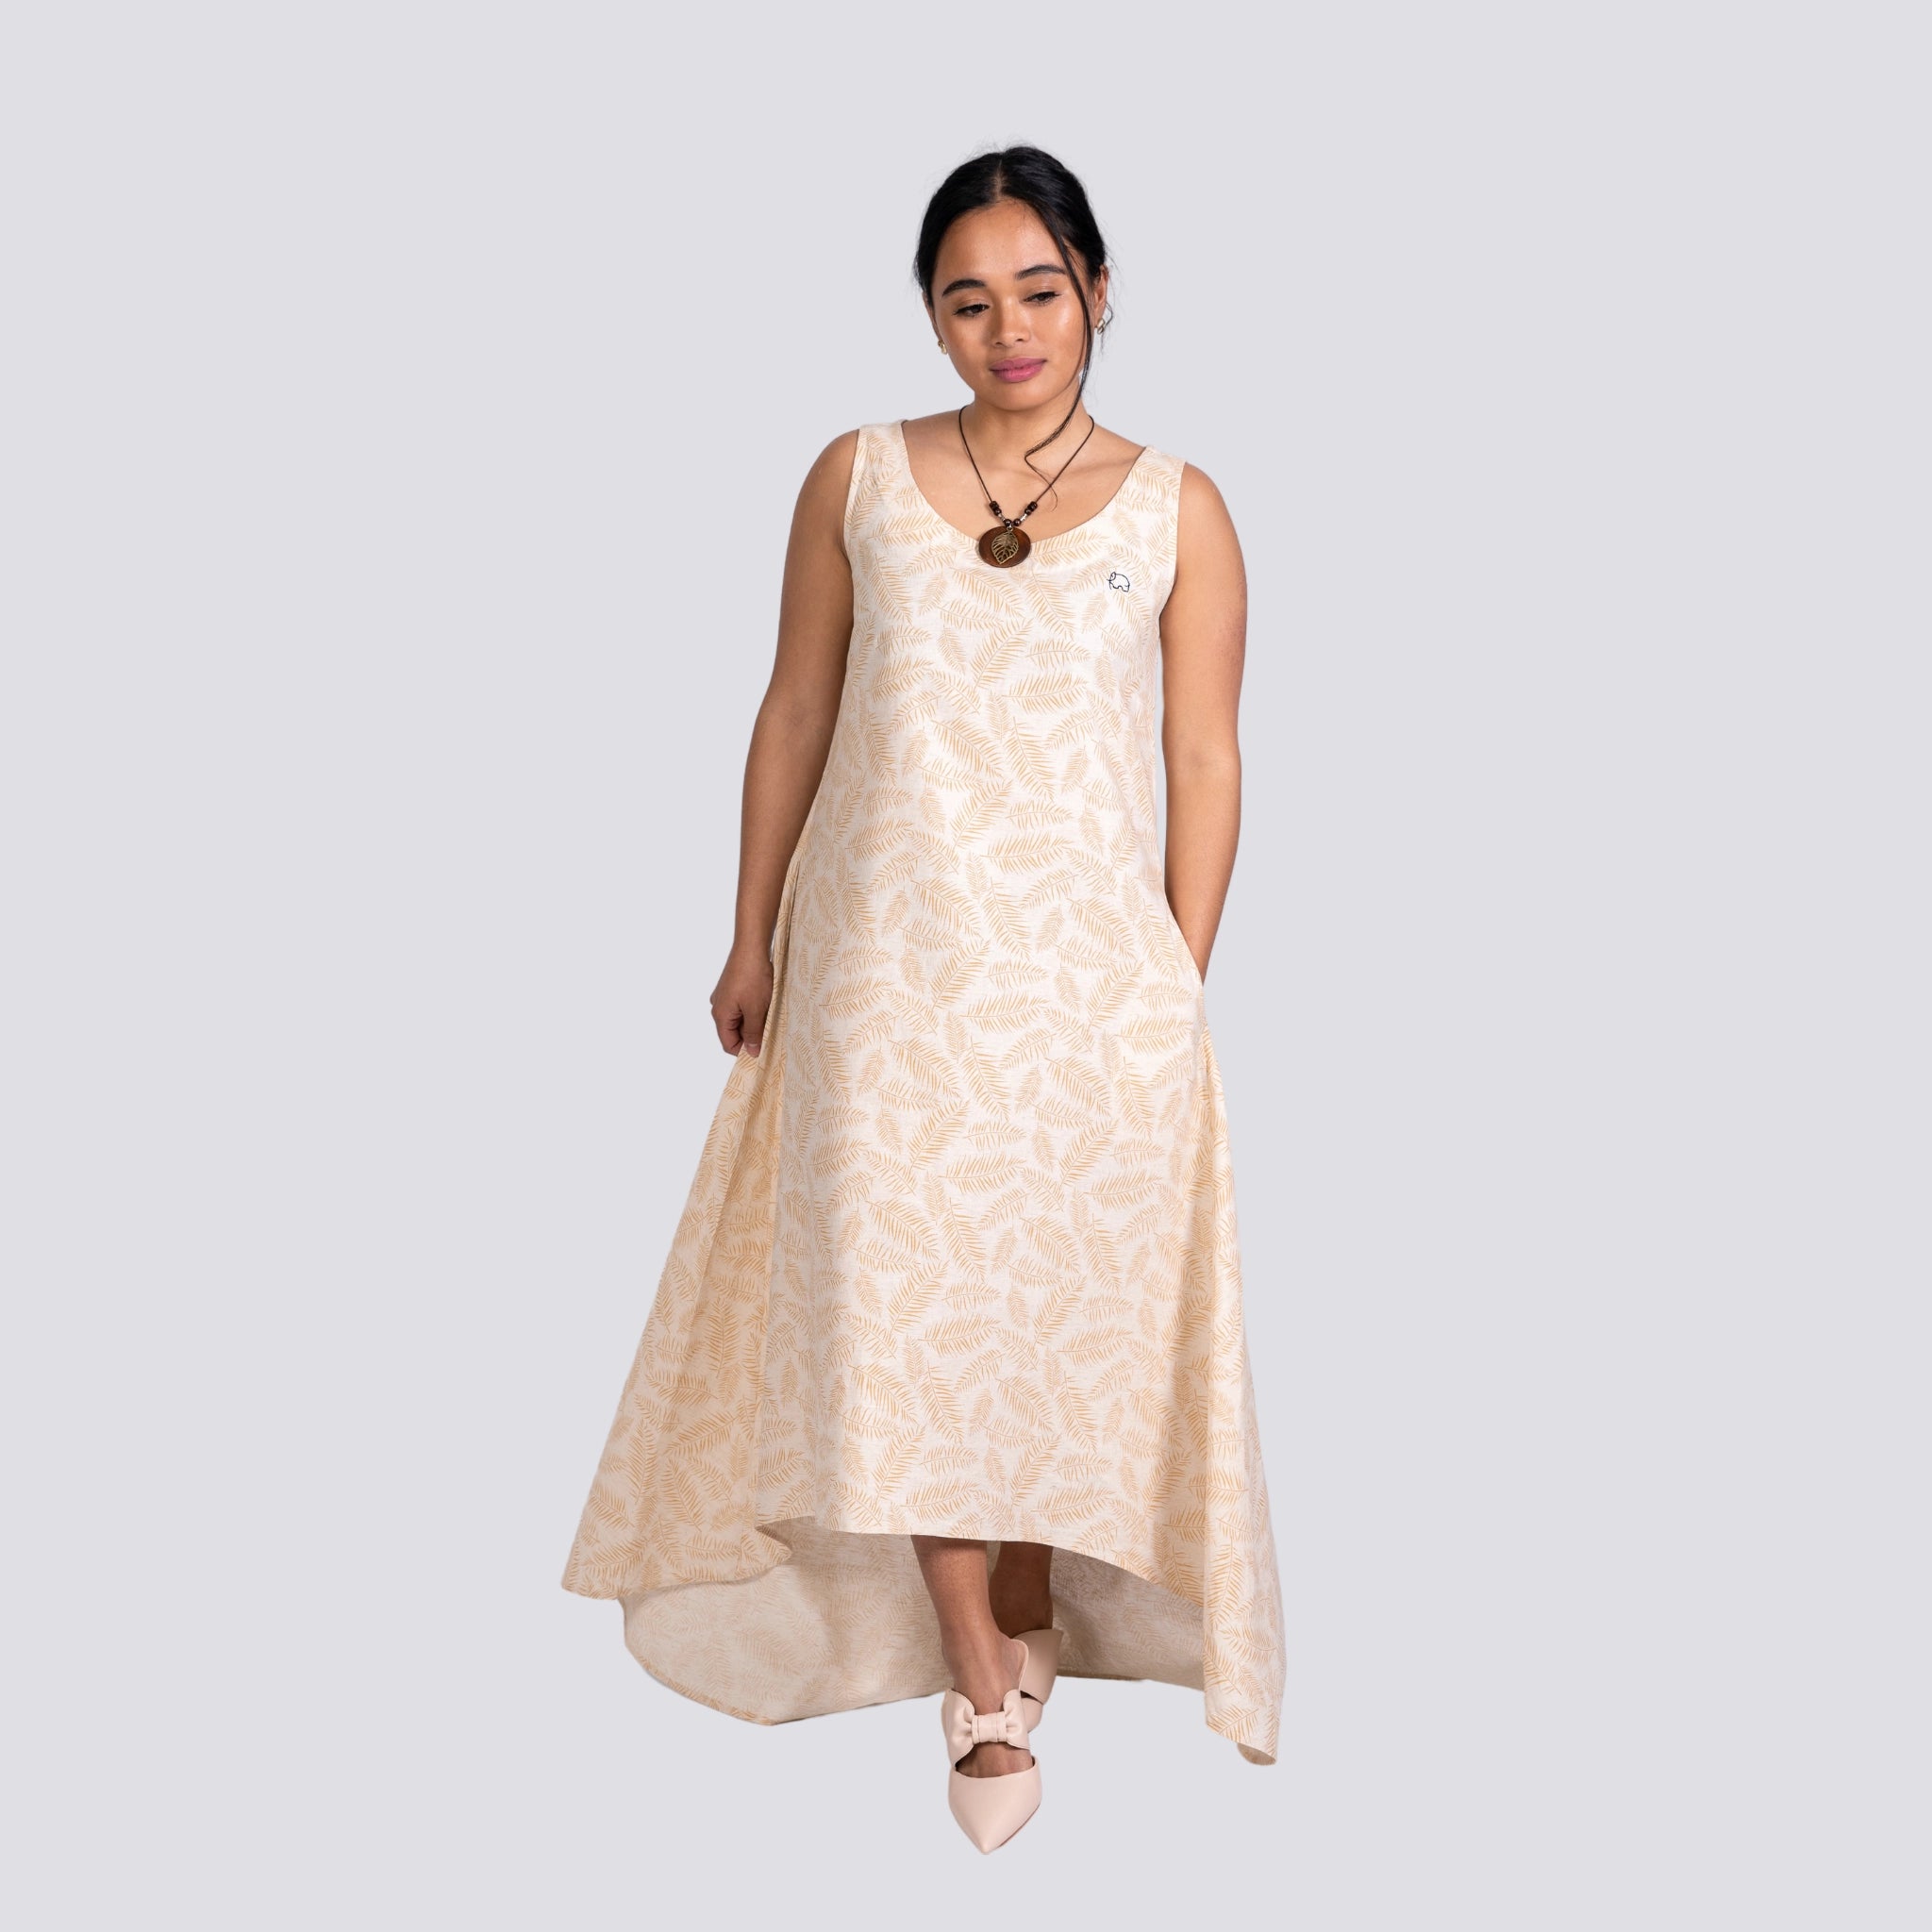 A woman in a flowing beige Karee Mystic Serenity High Low Linen Cotton Midi Dress and light pink shoes stands with closed eyes, against a grey background.